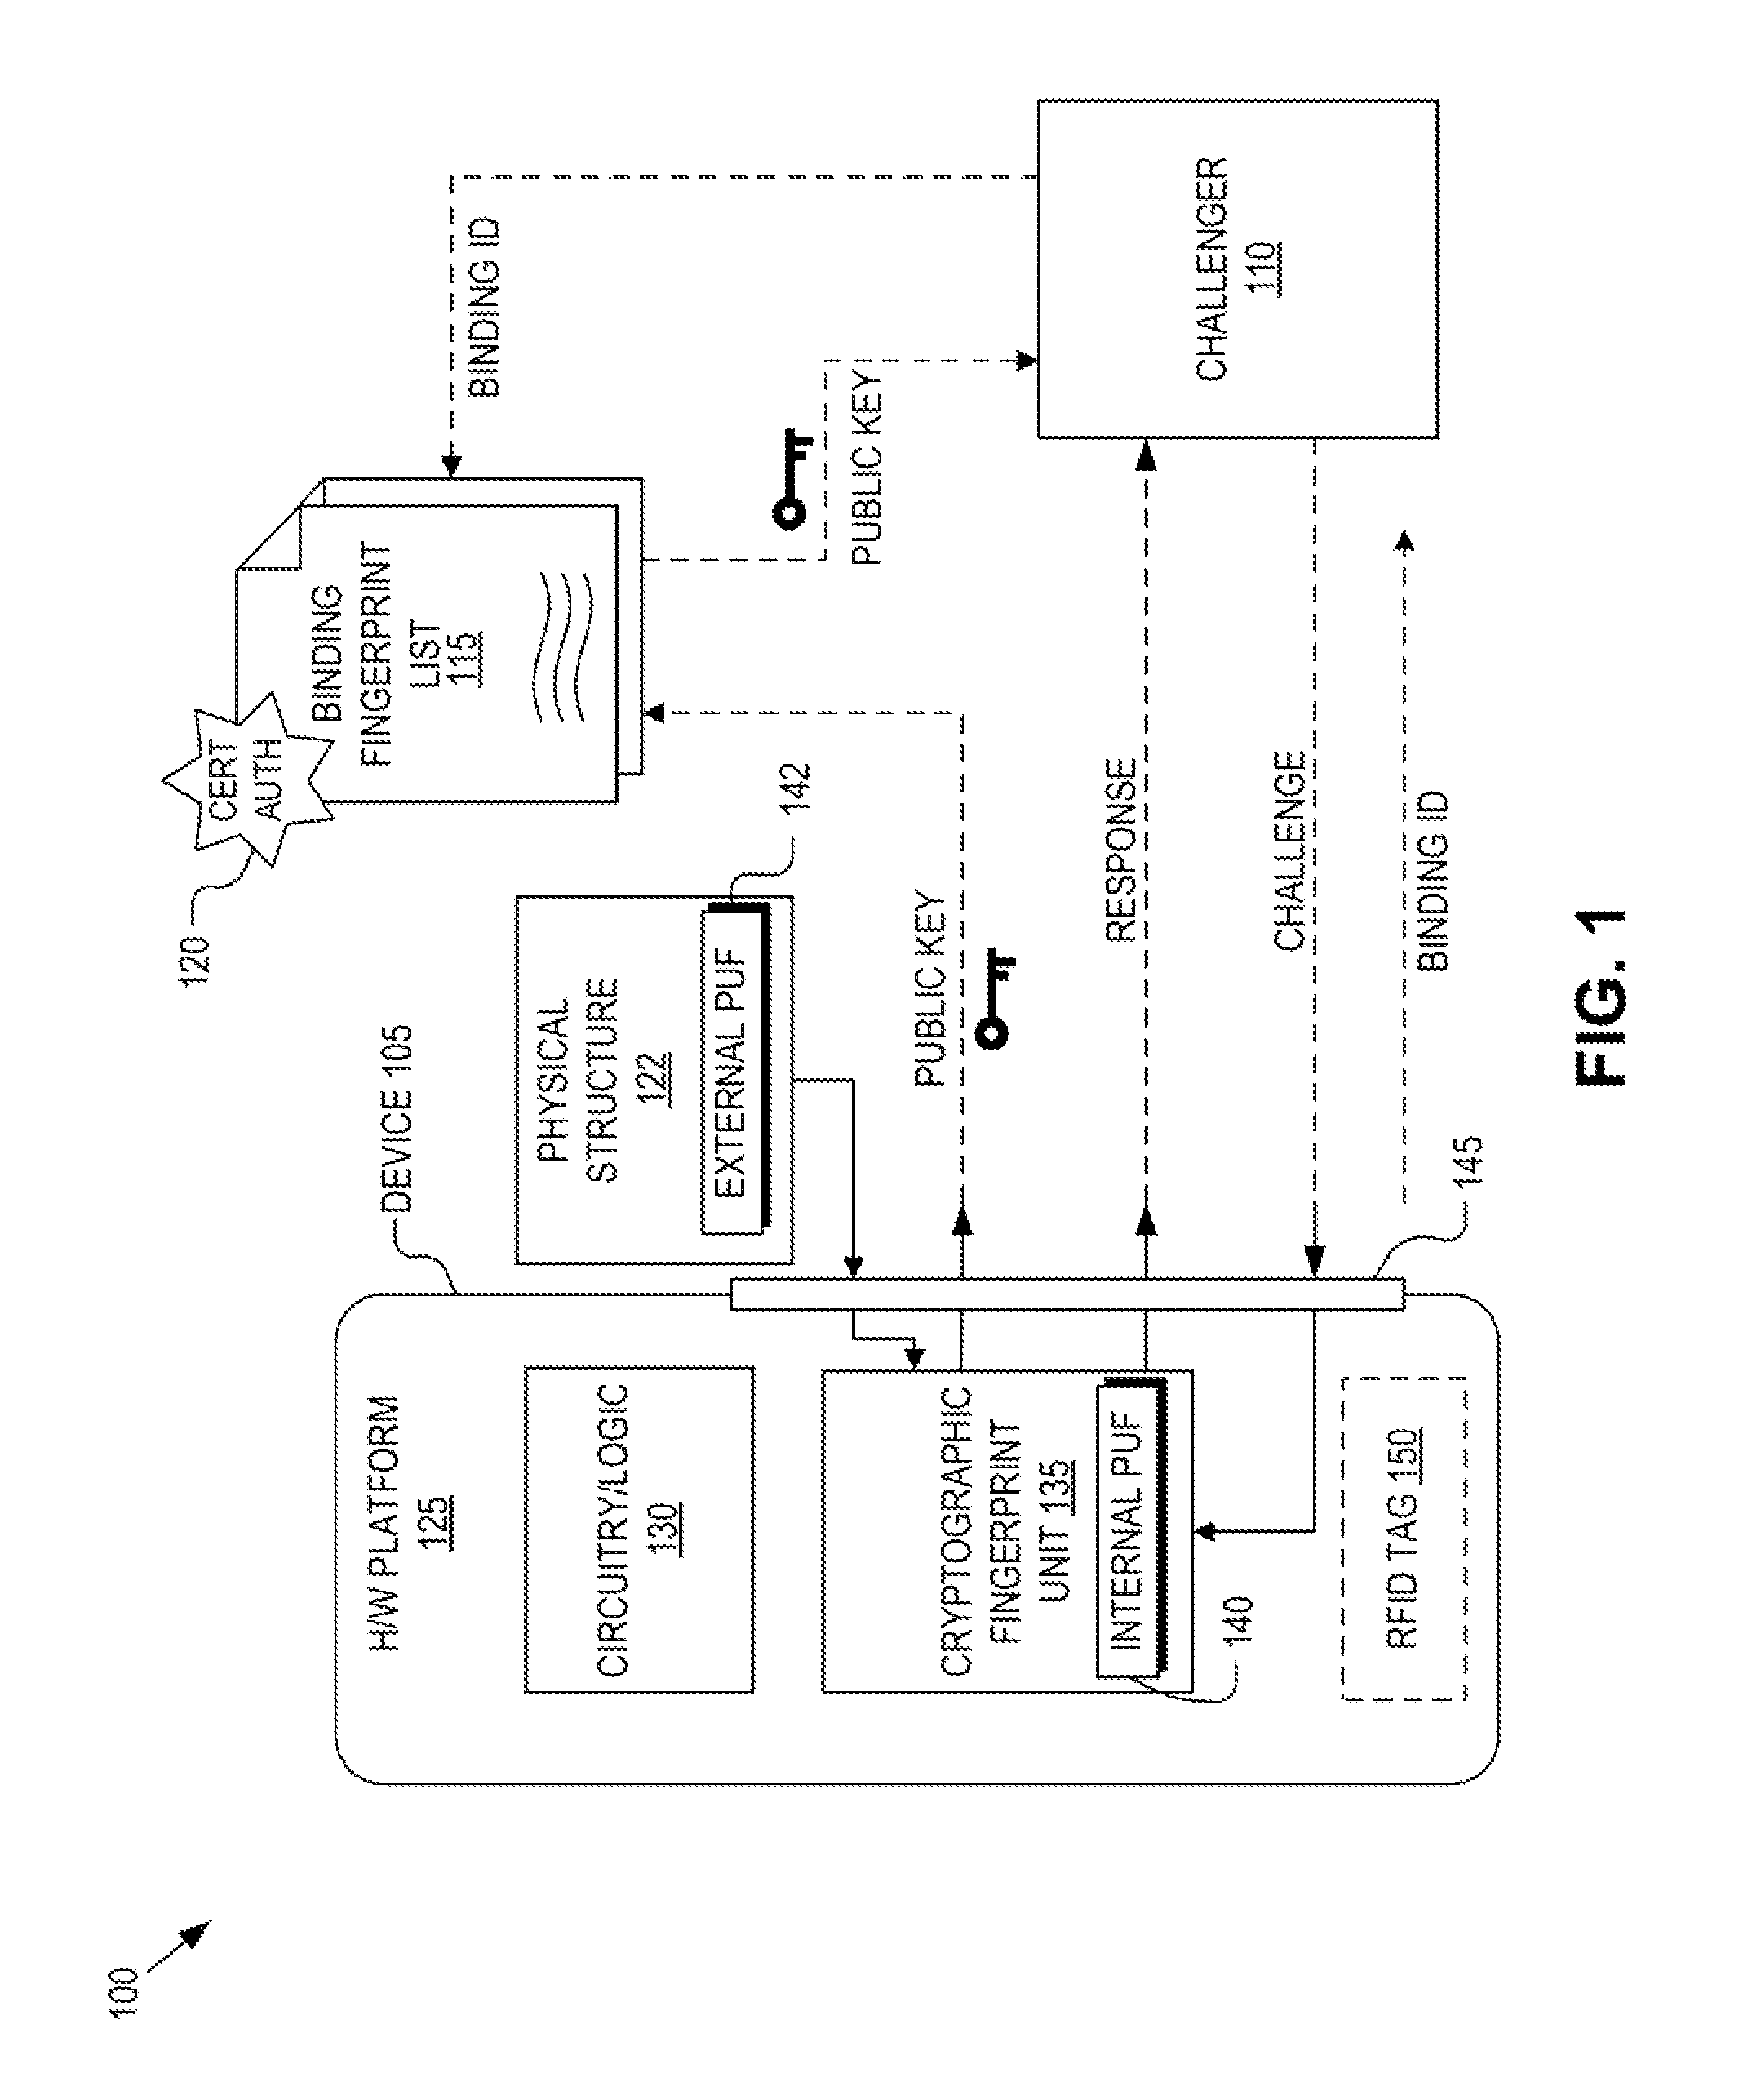 Hardware device to physical structure binding and authentication